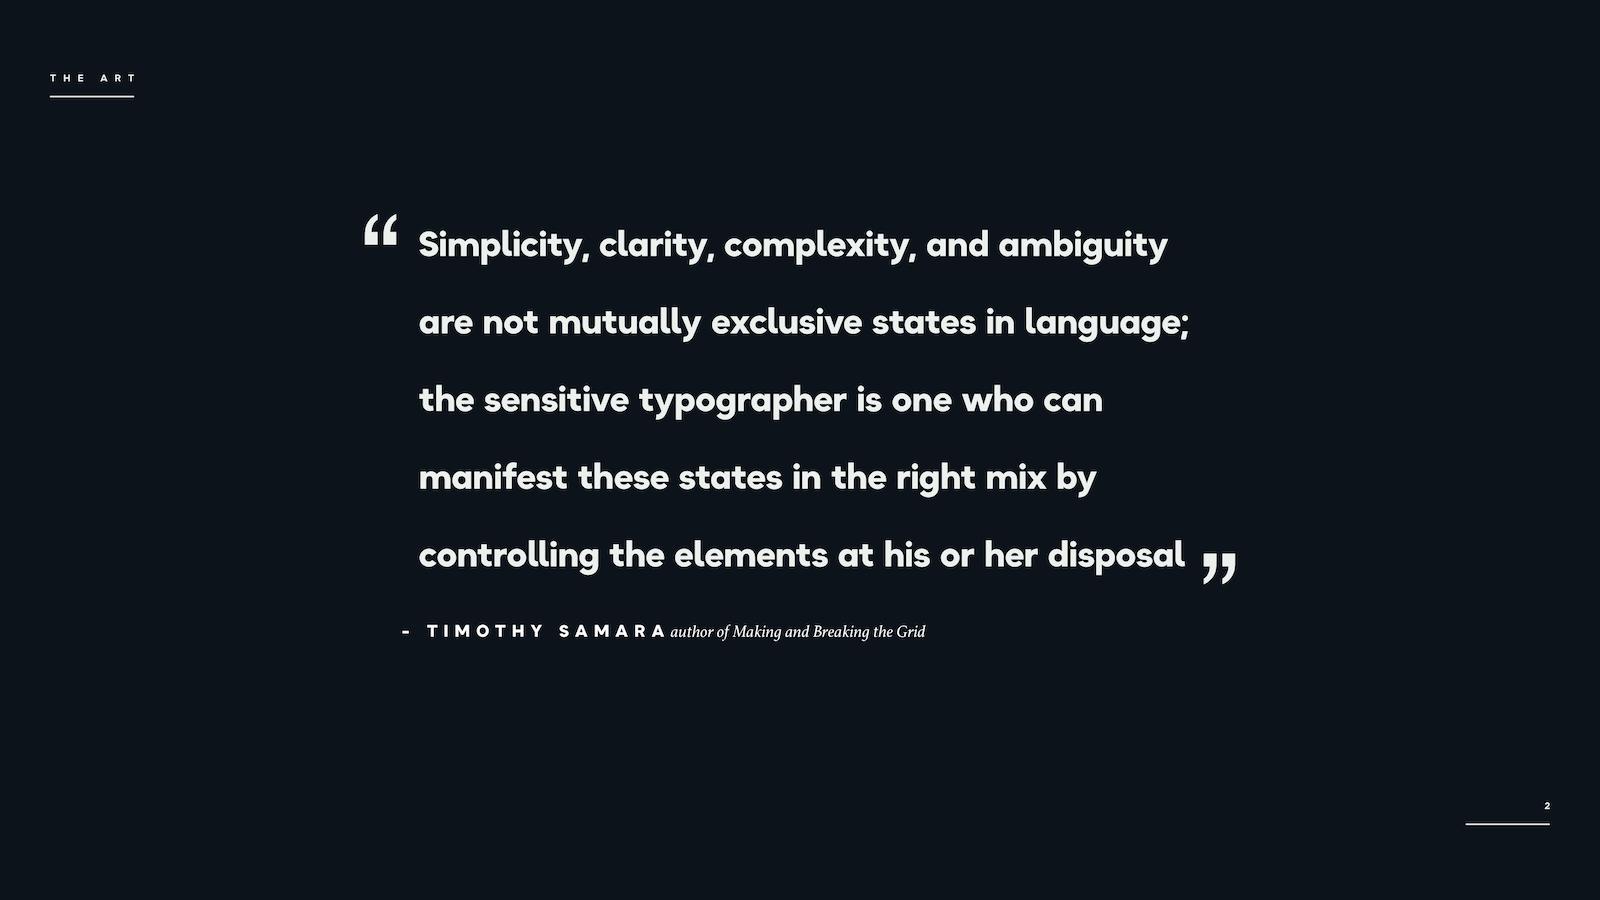 "Simplicity, clarity, complexity, and ambiguity are not mutually exclusive states in language; the sensitive typographer is one who can manifest these states in the right mix by controlling the elements at his or her disposal." - Timothy Samara 